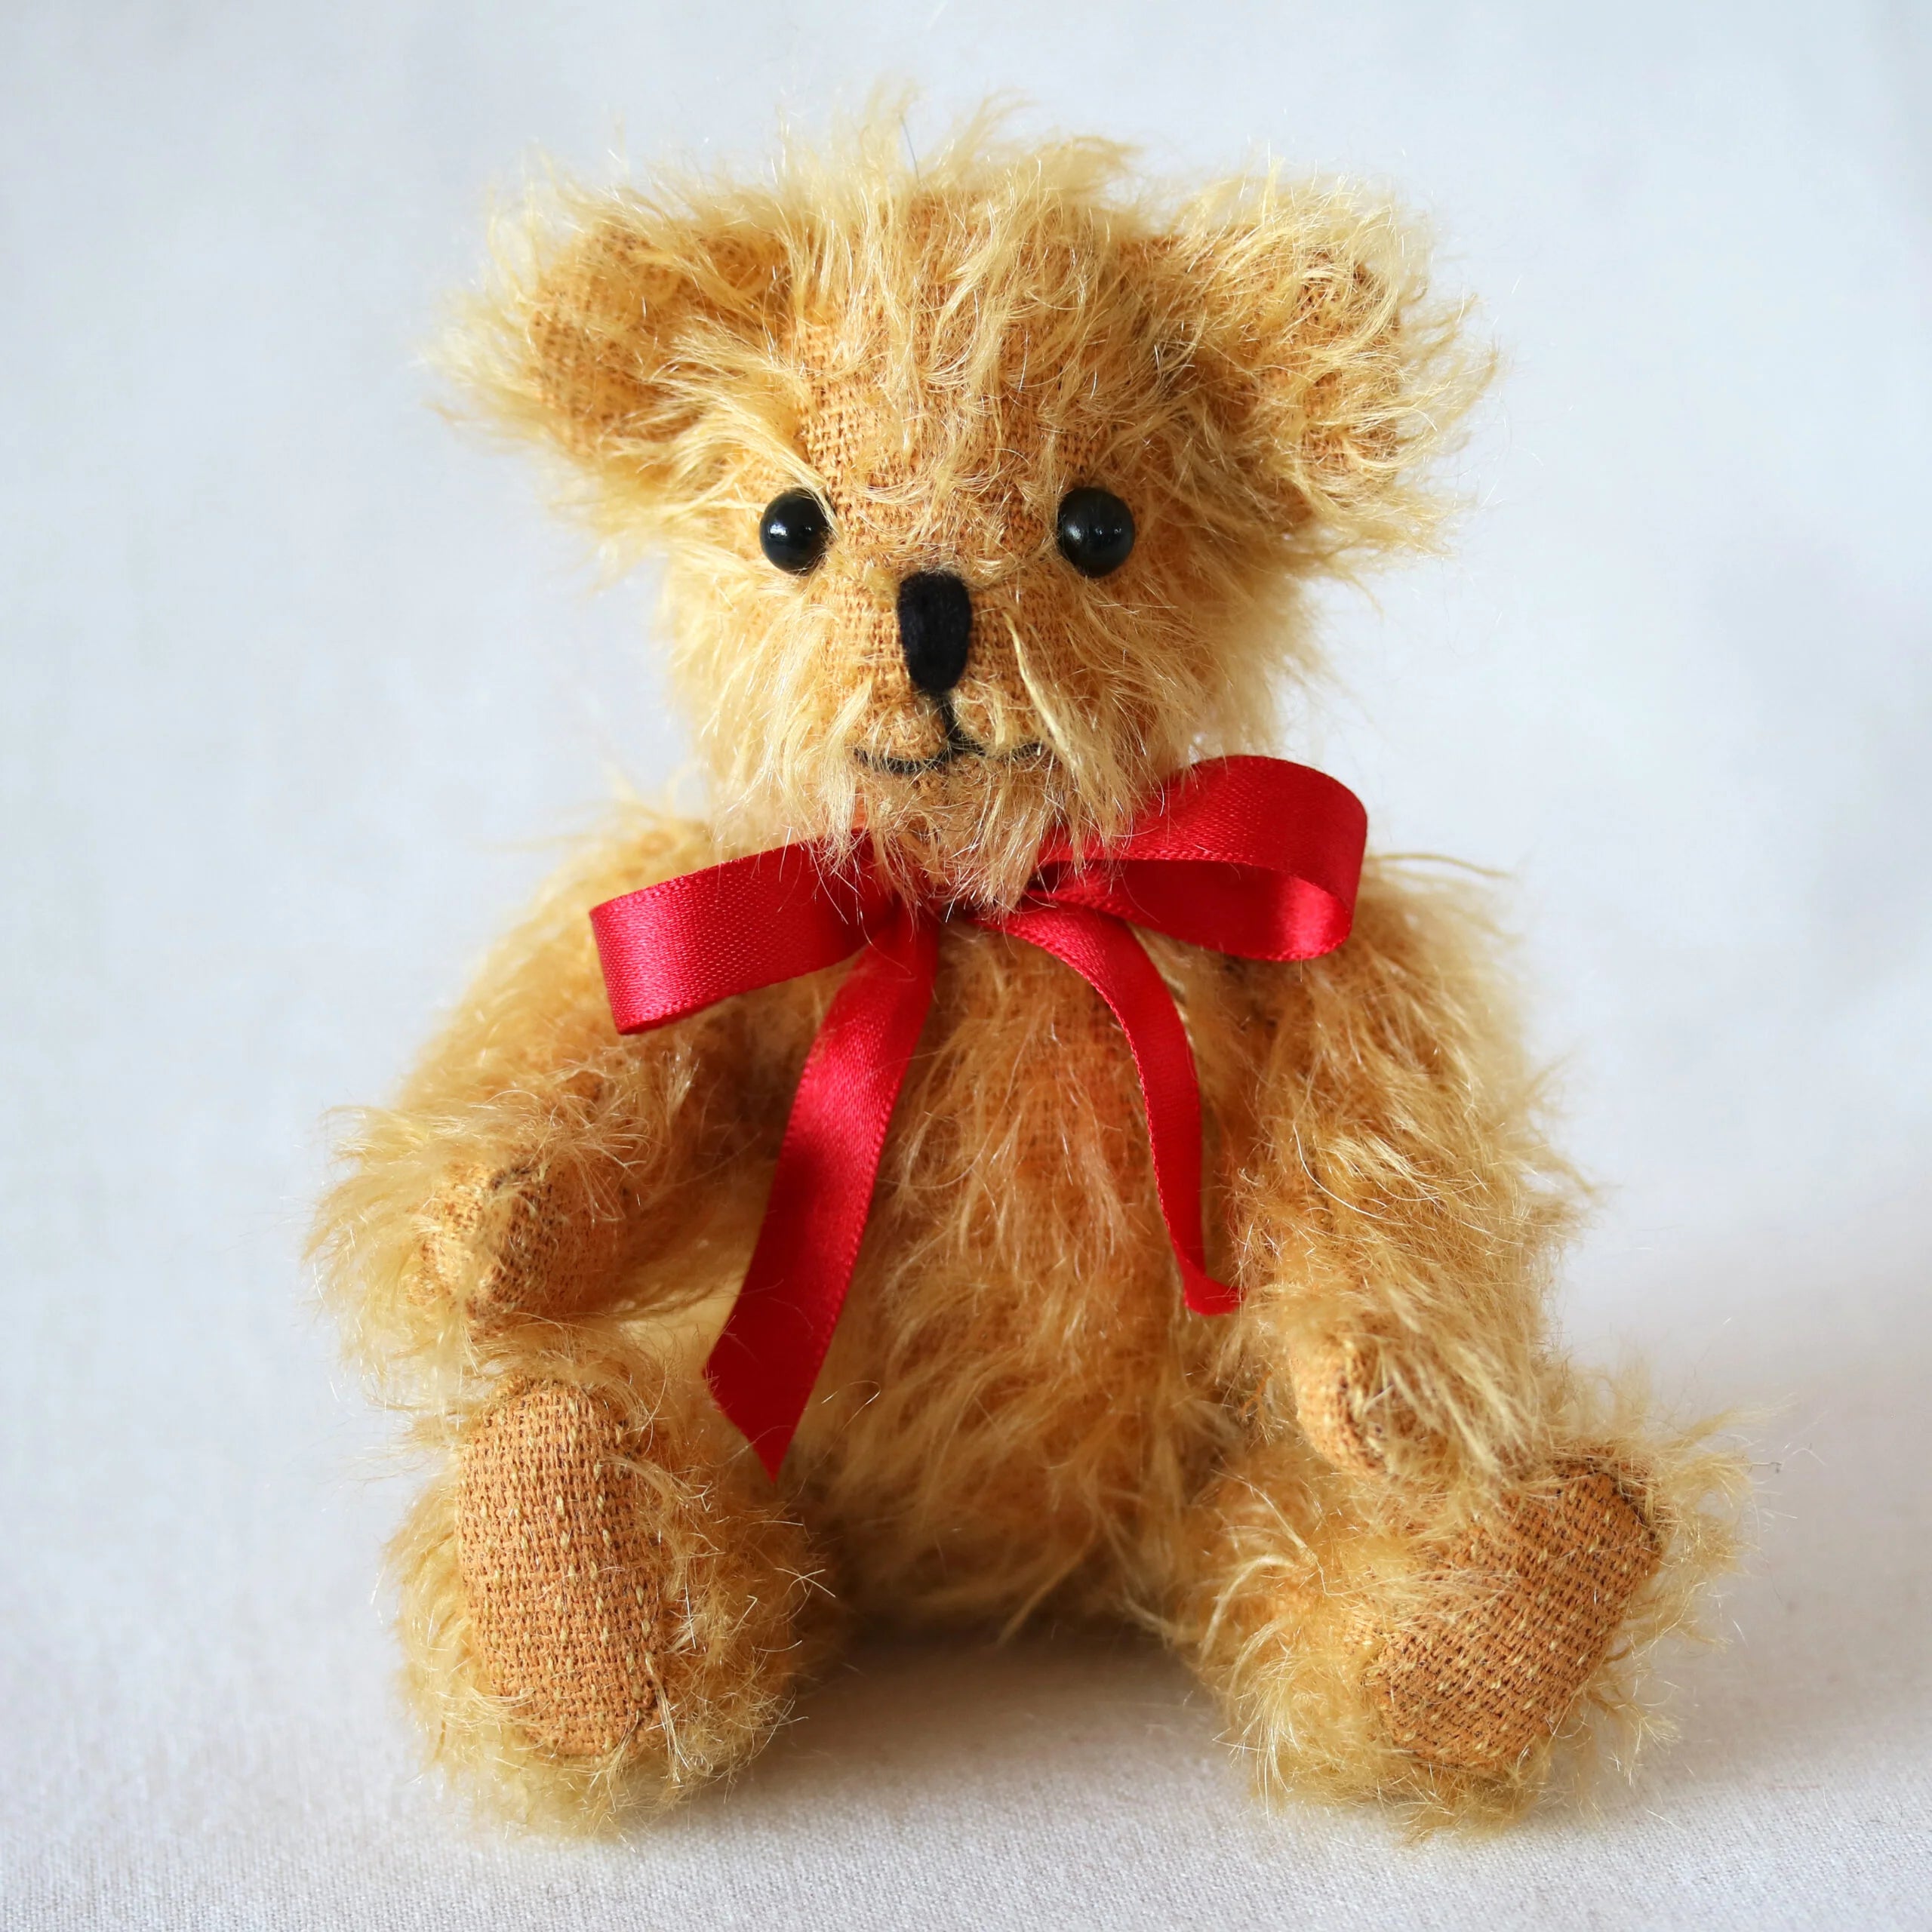 Golden Peter the Bear by Canterbury Bears